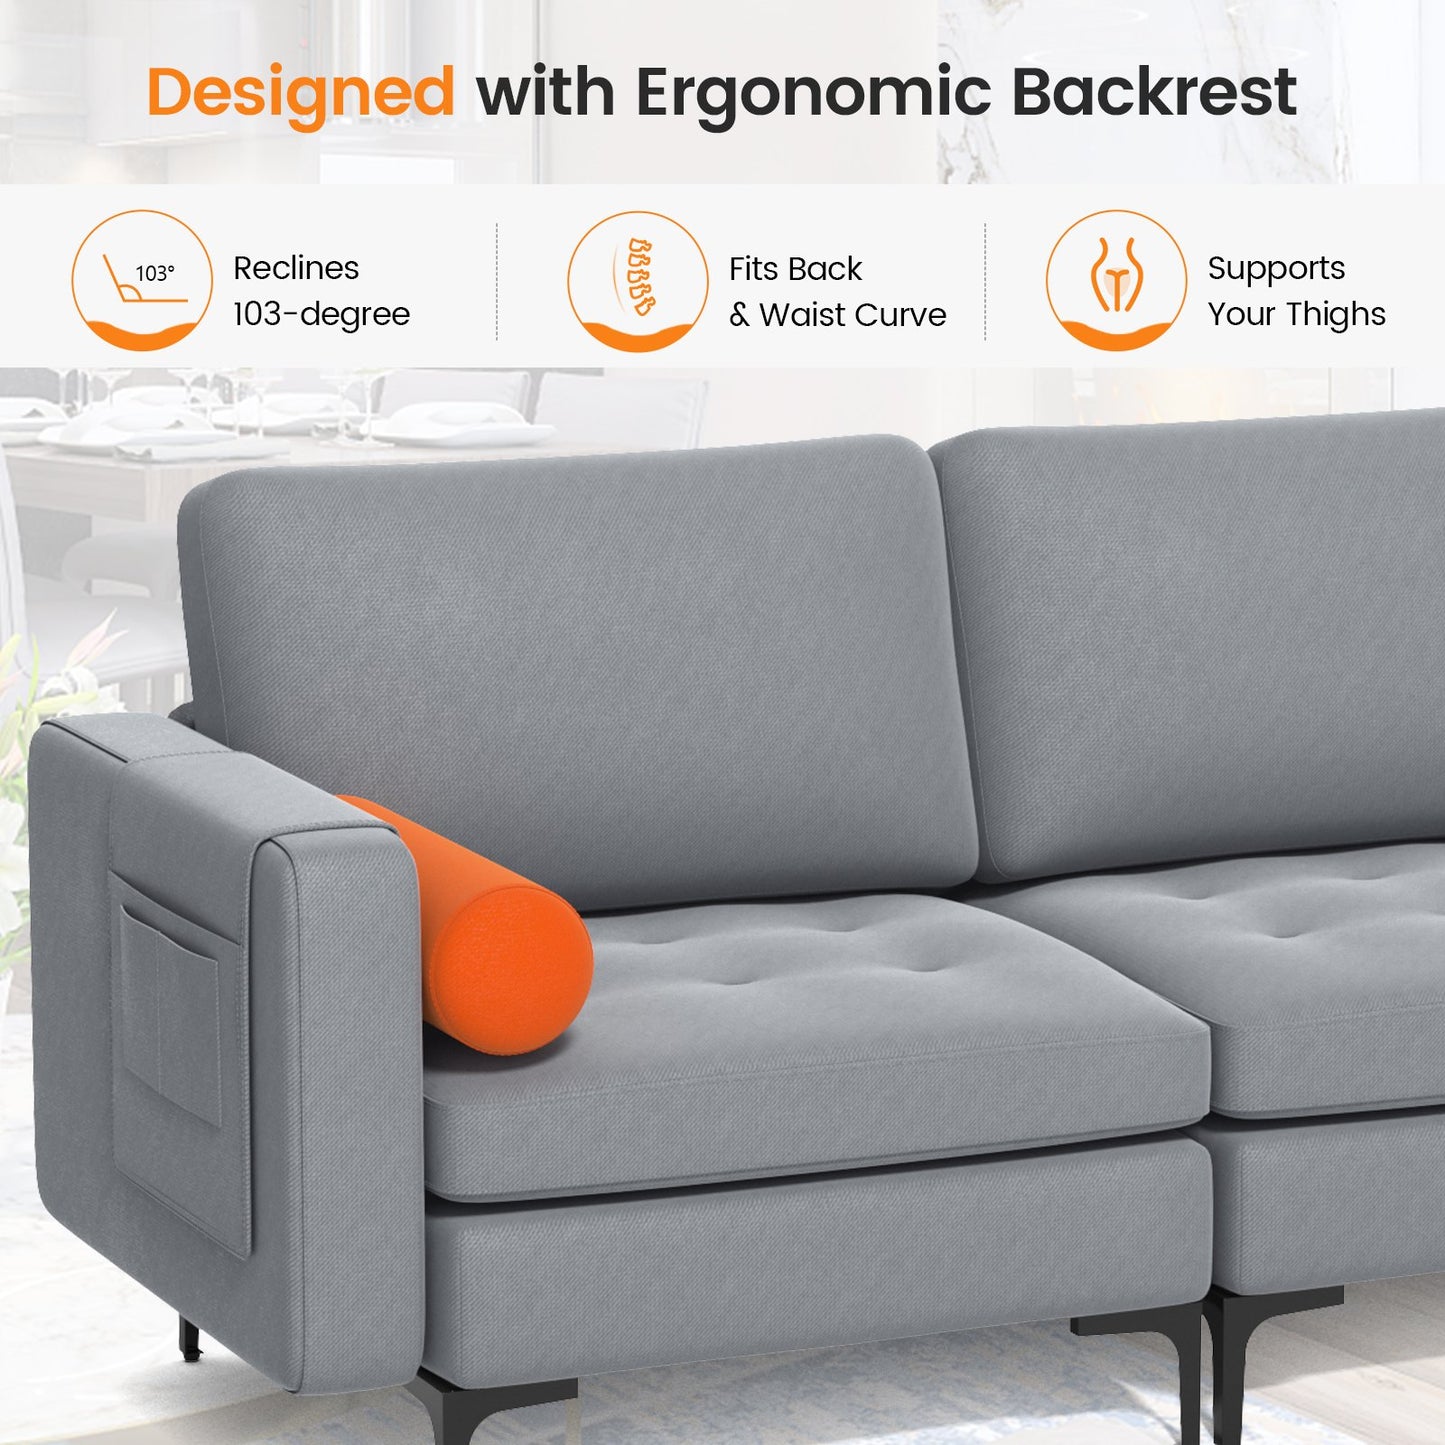 Modular 3-Seat Sofa Couch with Socket USB Ports and Side Storage Pocket, Gray